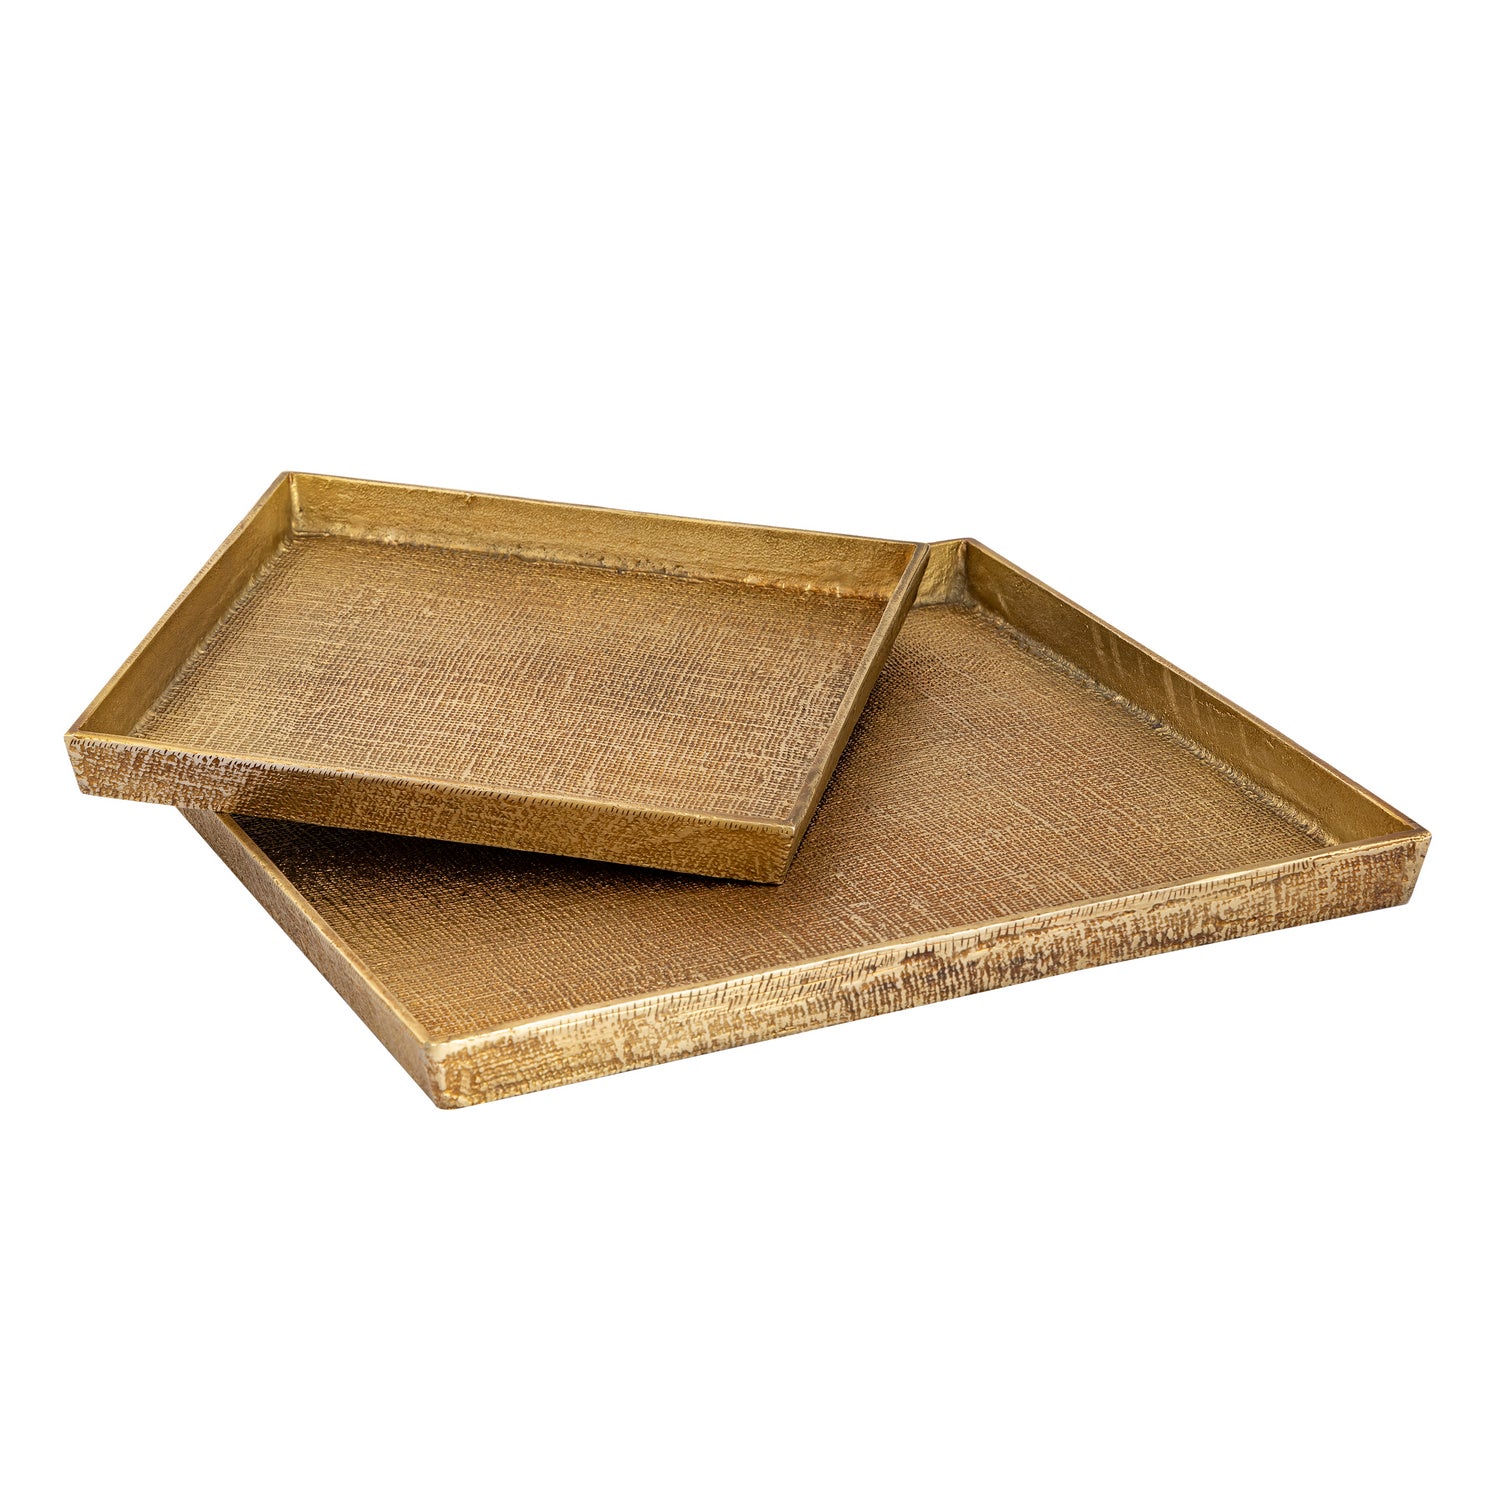 ELK Home - H0807-10664/S2 - Tray - Square Linen - Antique Brass